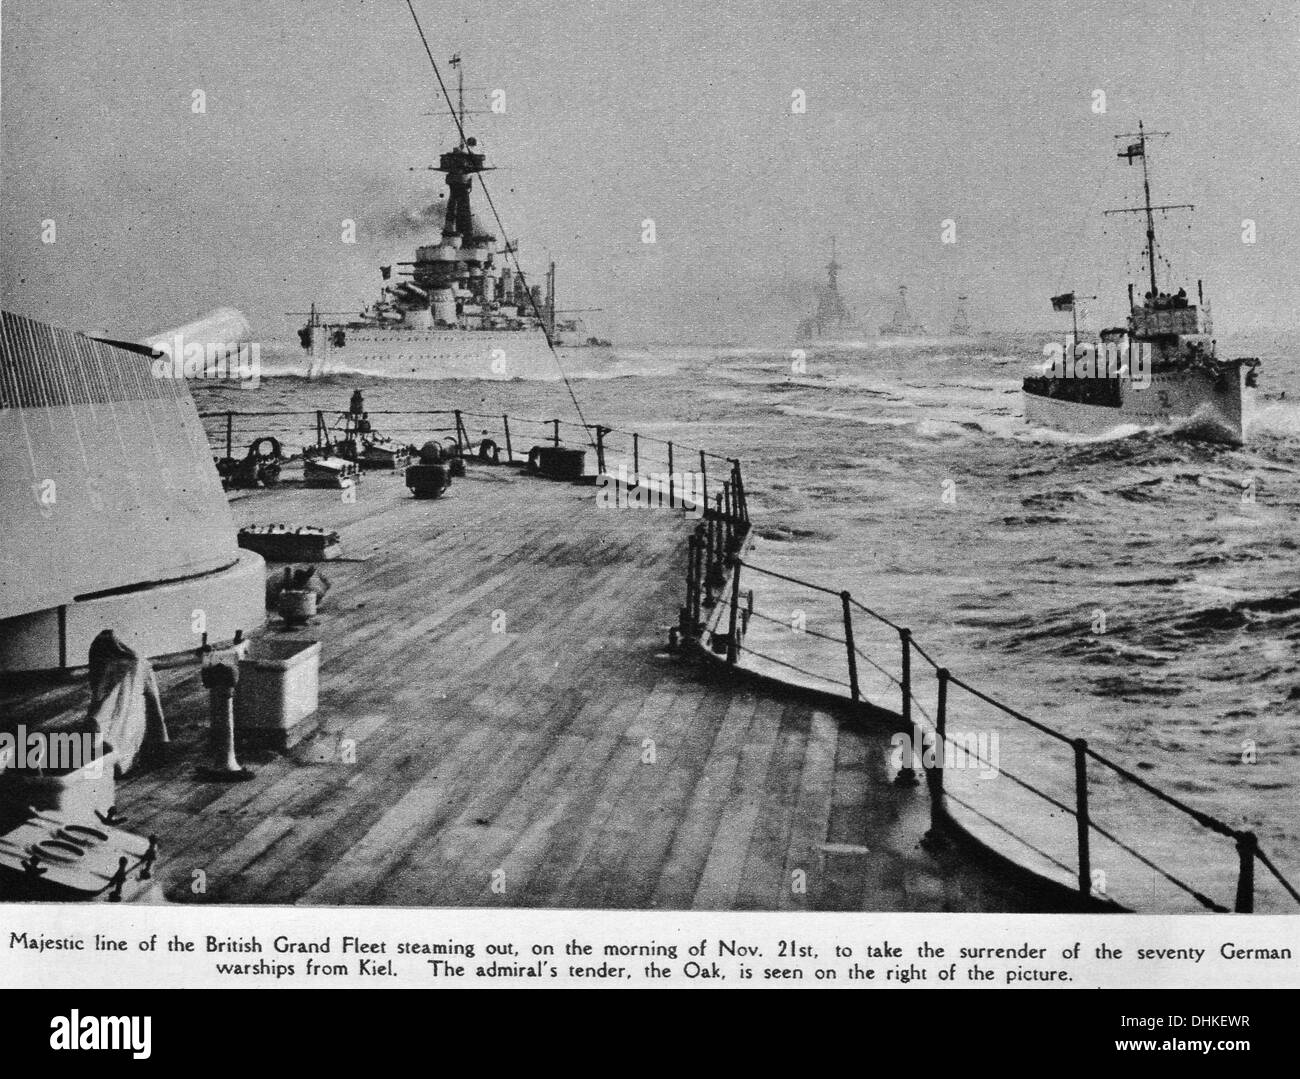 Majestic line of the British Grand Fleet steaming out, on the morning of Nov. 21st, to take the surrender seventy German ships Stock Photo